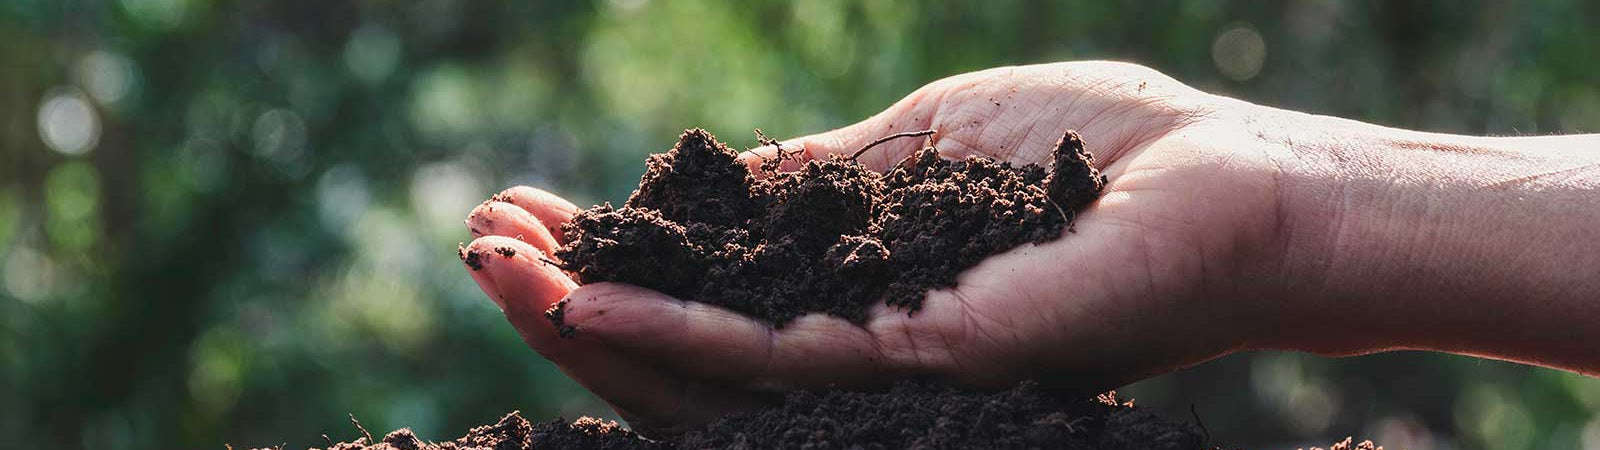 10 Facts About Soil Health You Didn’t Learn in School